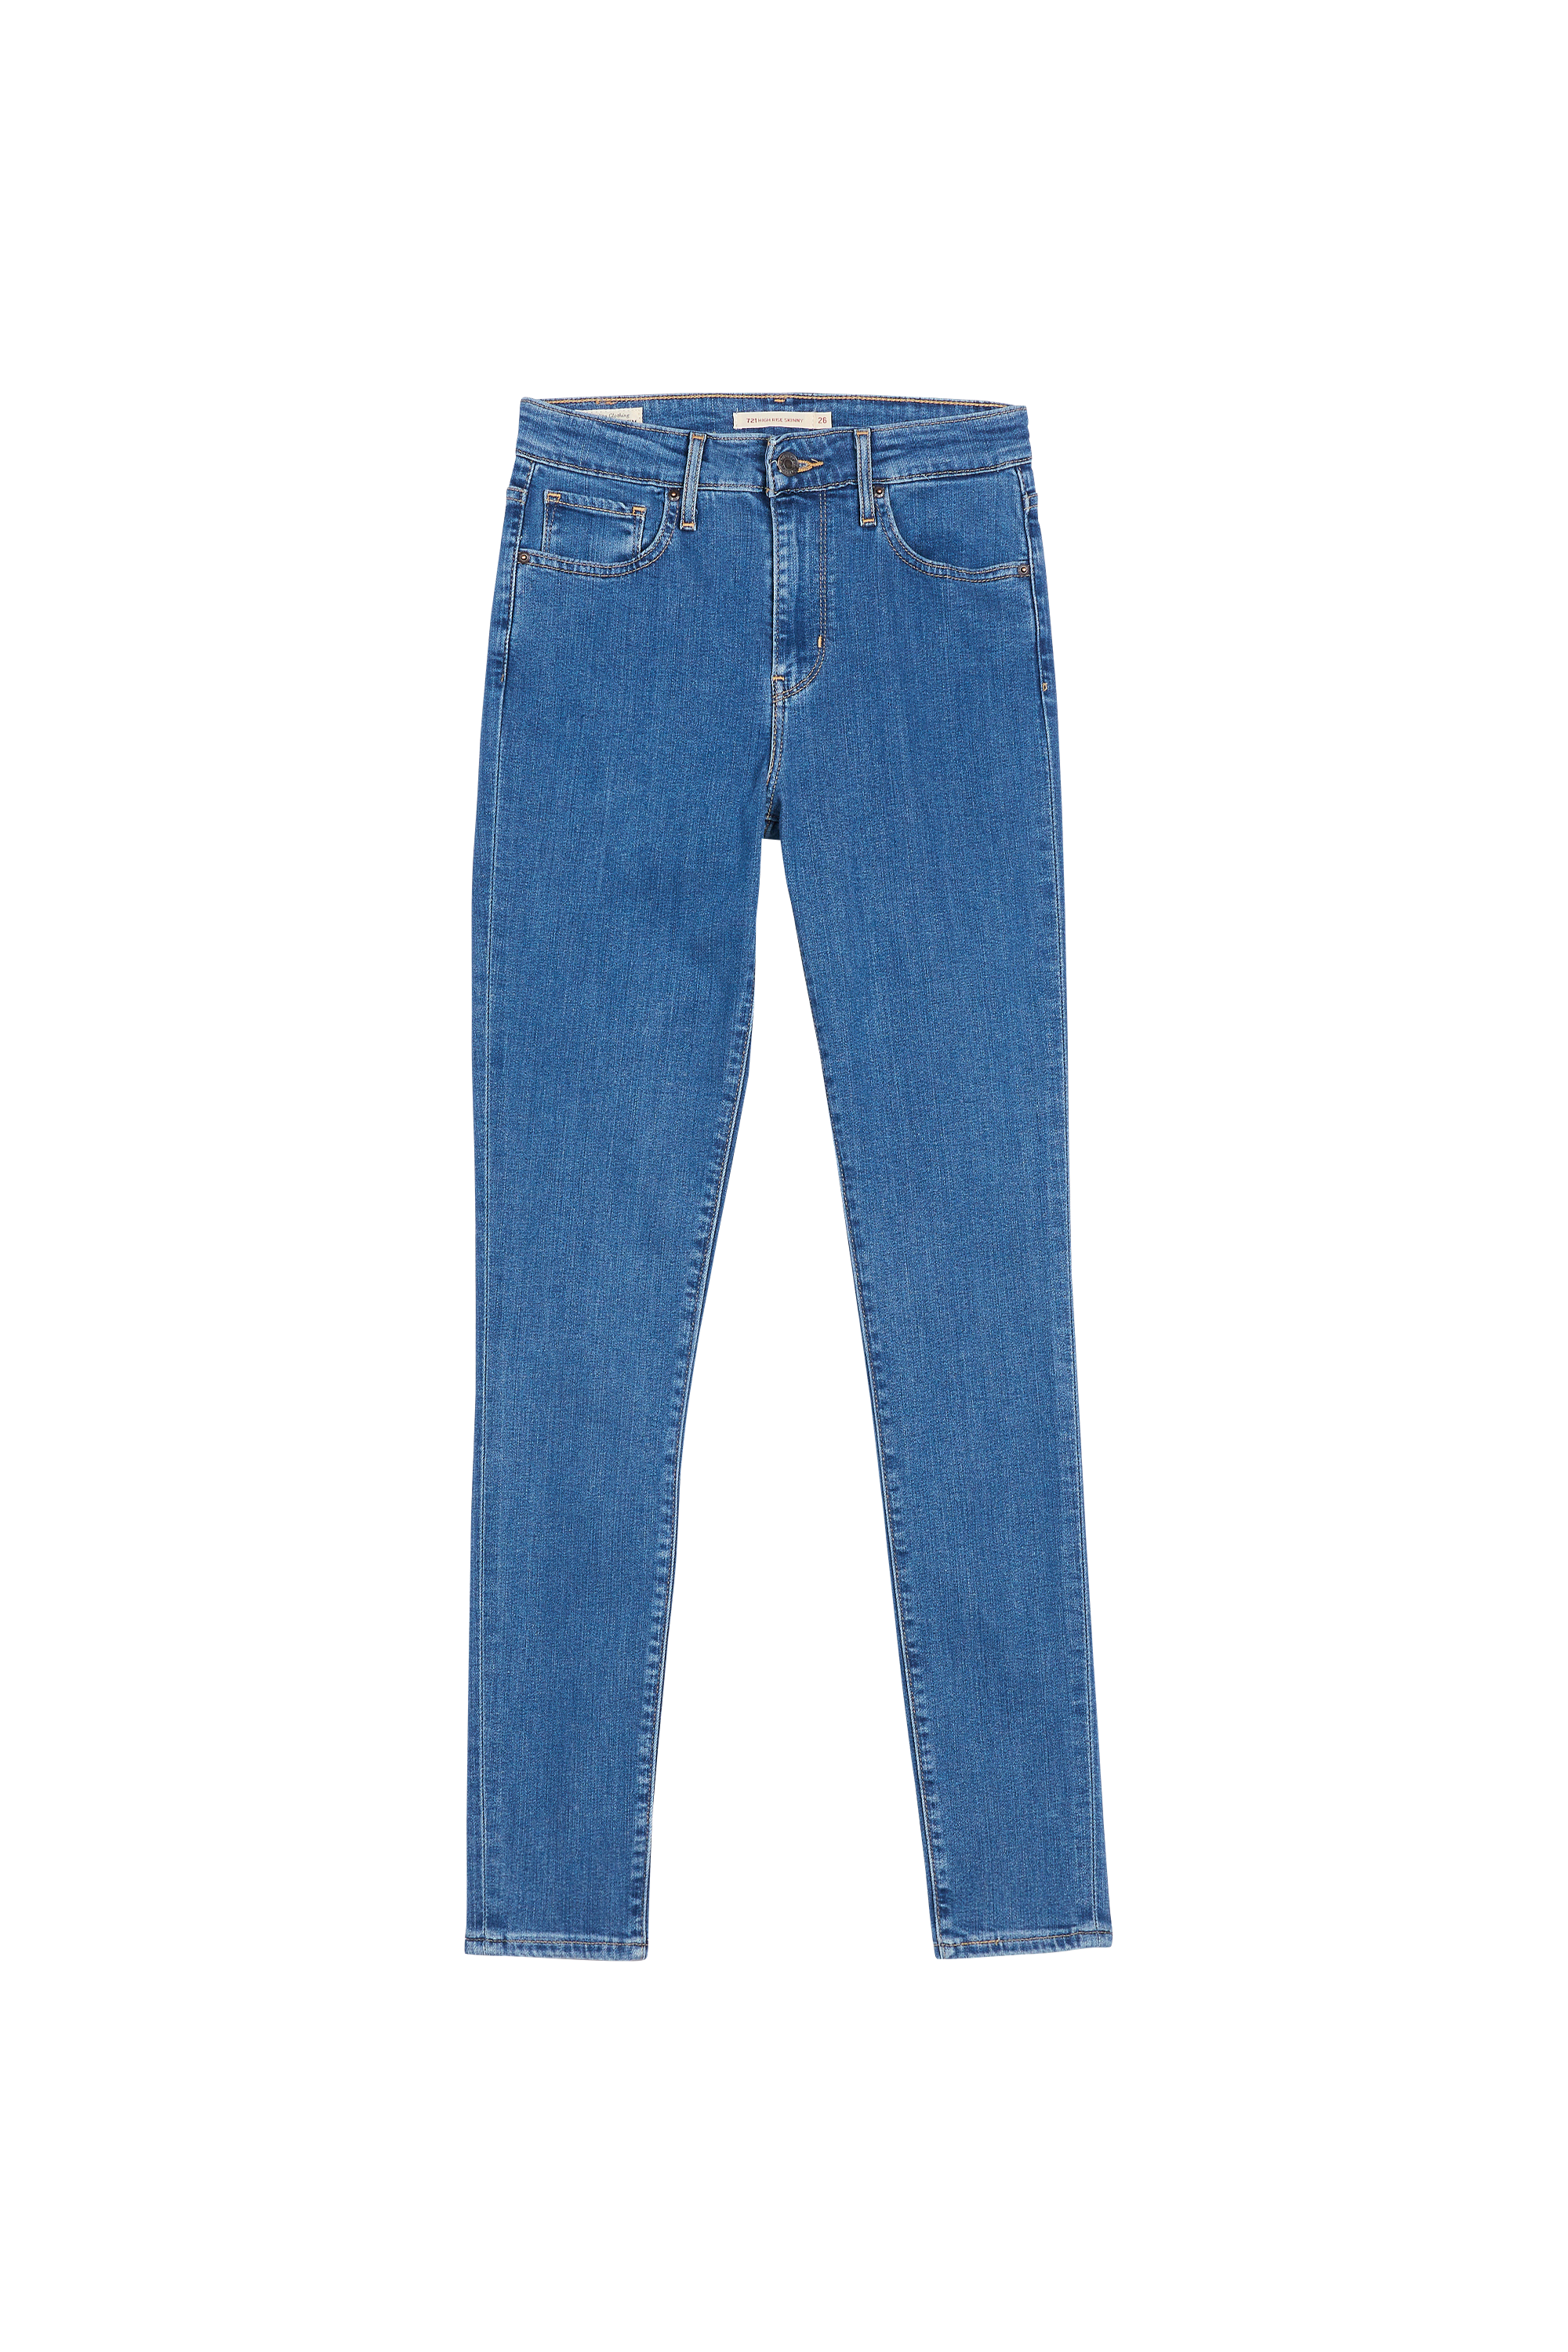 Levi's - Jean skinny taille haute - Taille 24/32